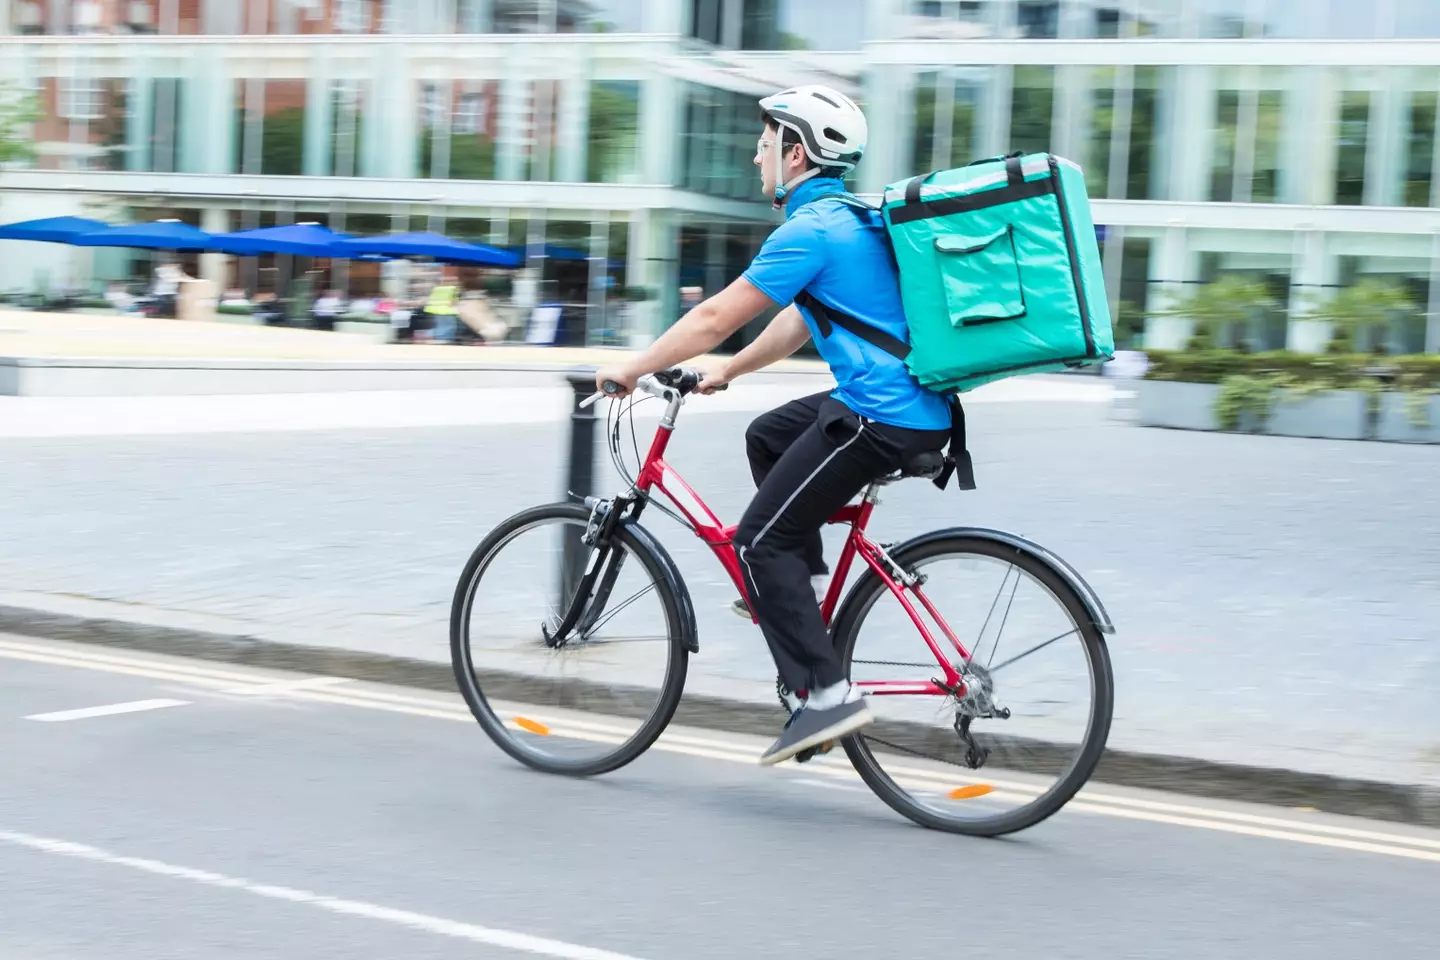 The delivery driver declines 75 percent of orders.